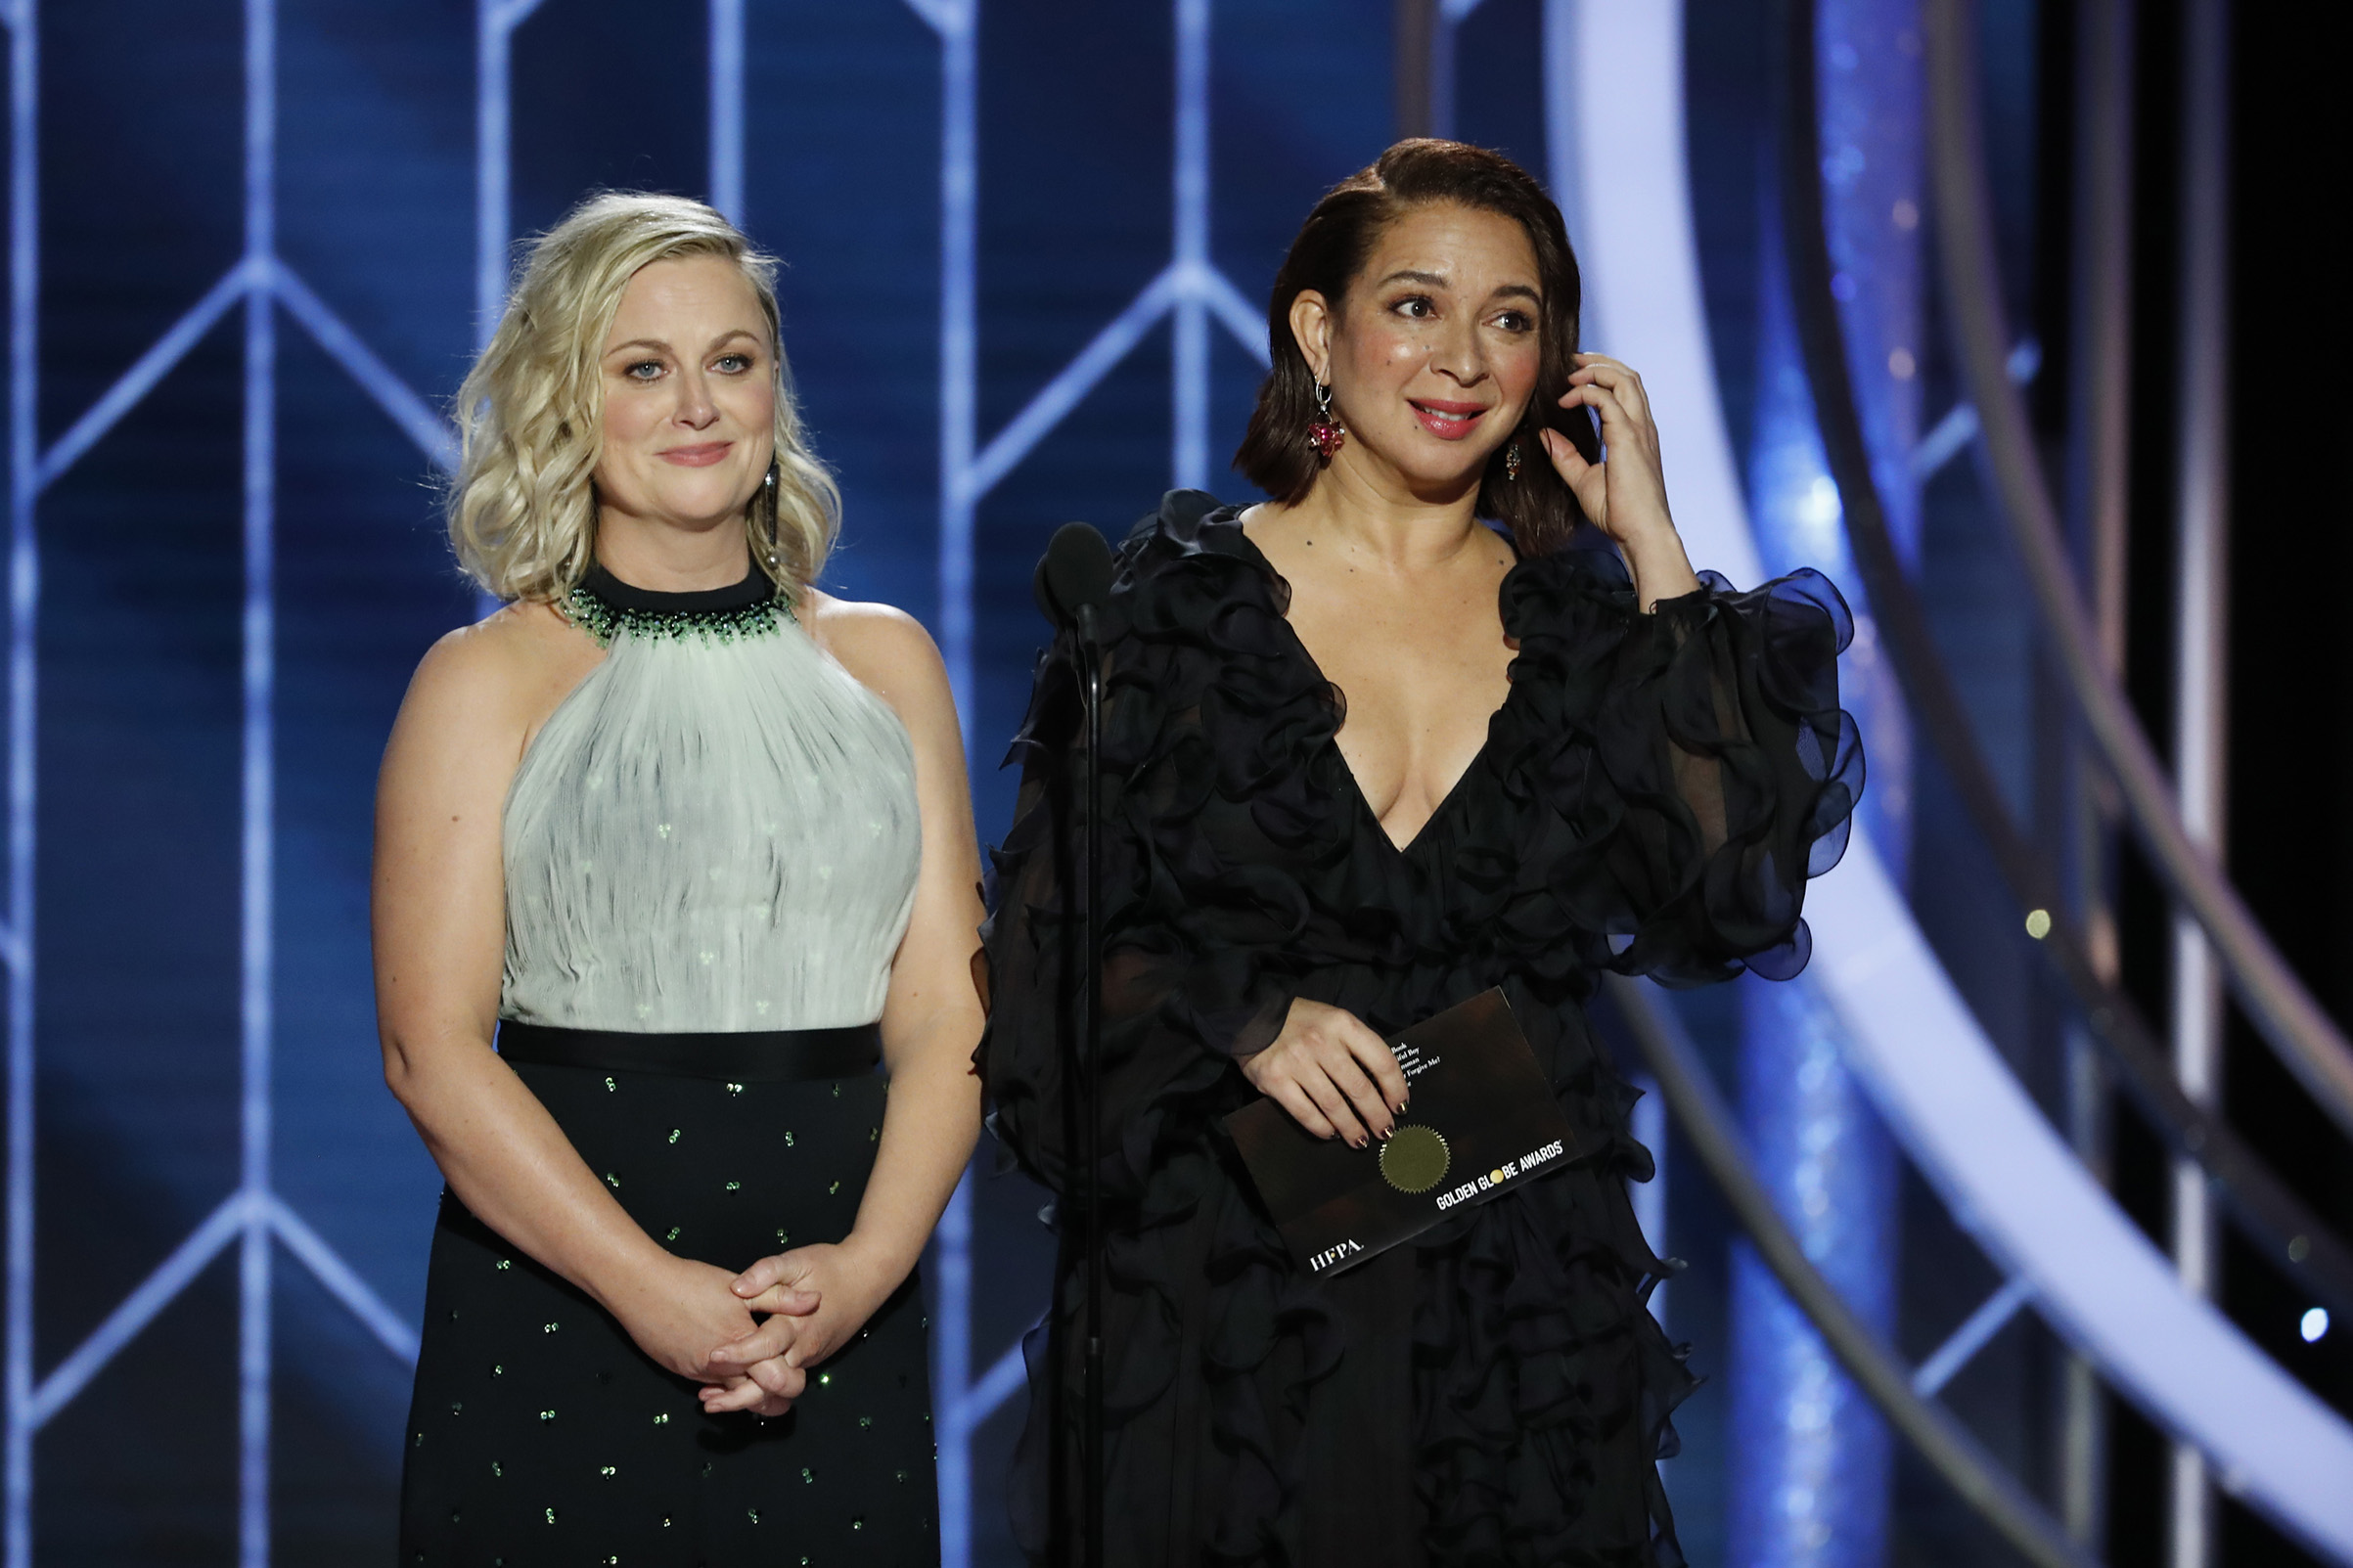 Presenters Amy Poehler and Maya Rudolph speak onstage during the 76th Annual Golden Globe Awards. (NBCUniversal/Getty Images)